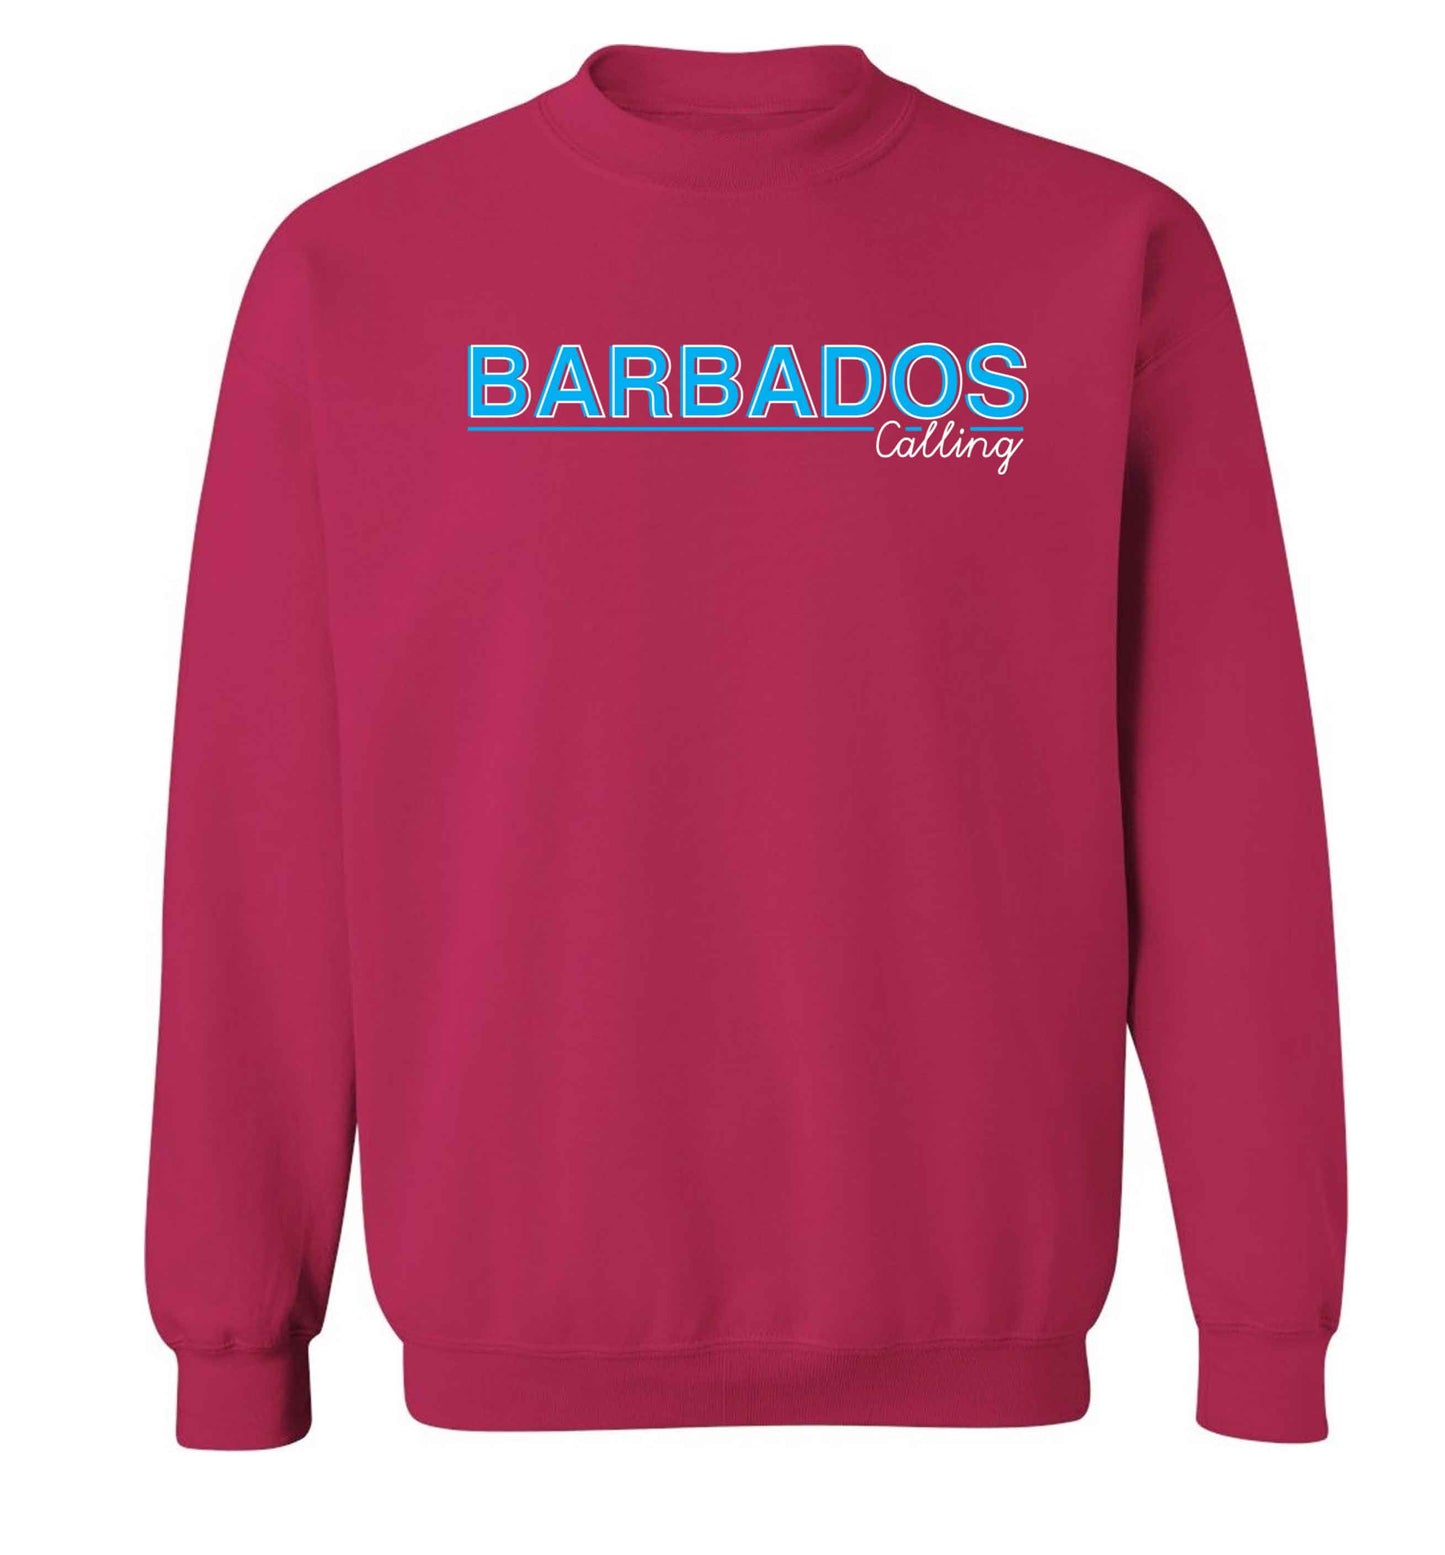 Barbados calling Adult's unisex pink Sweater 2XL